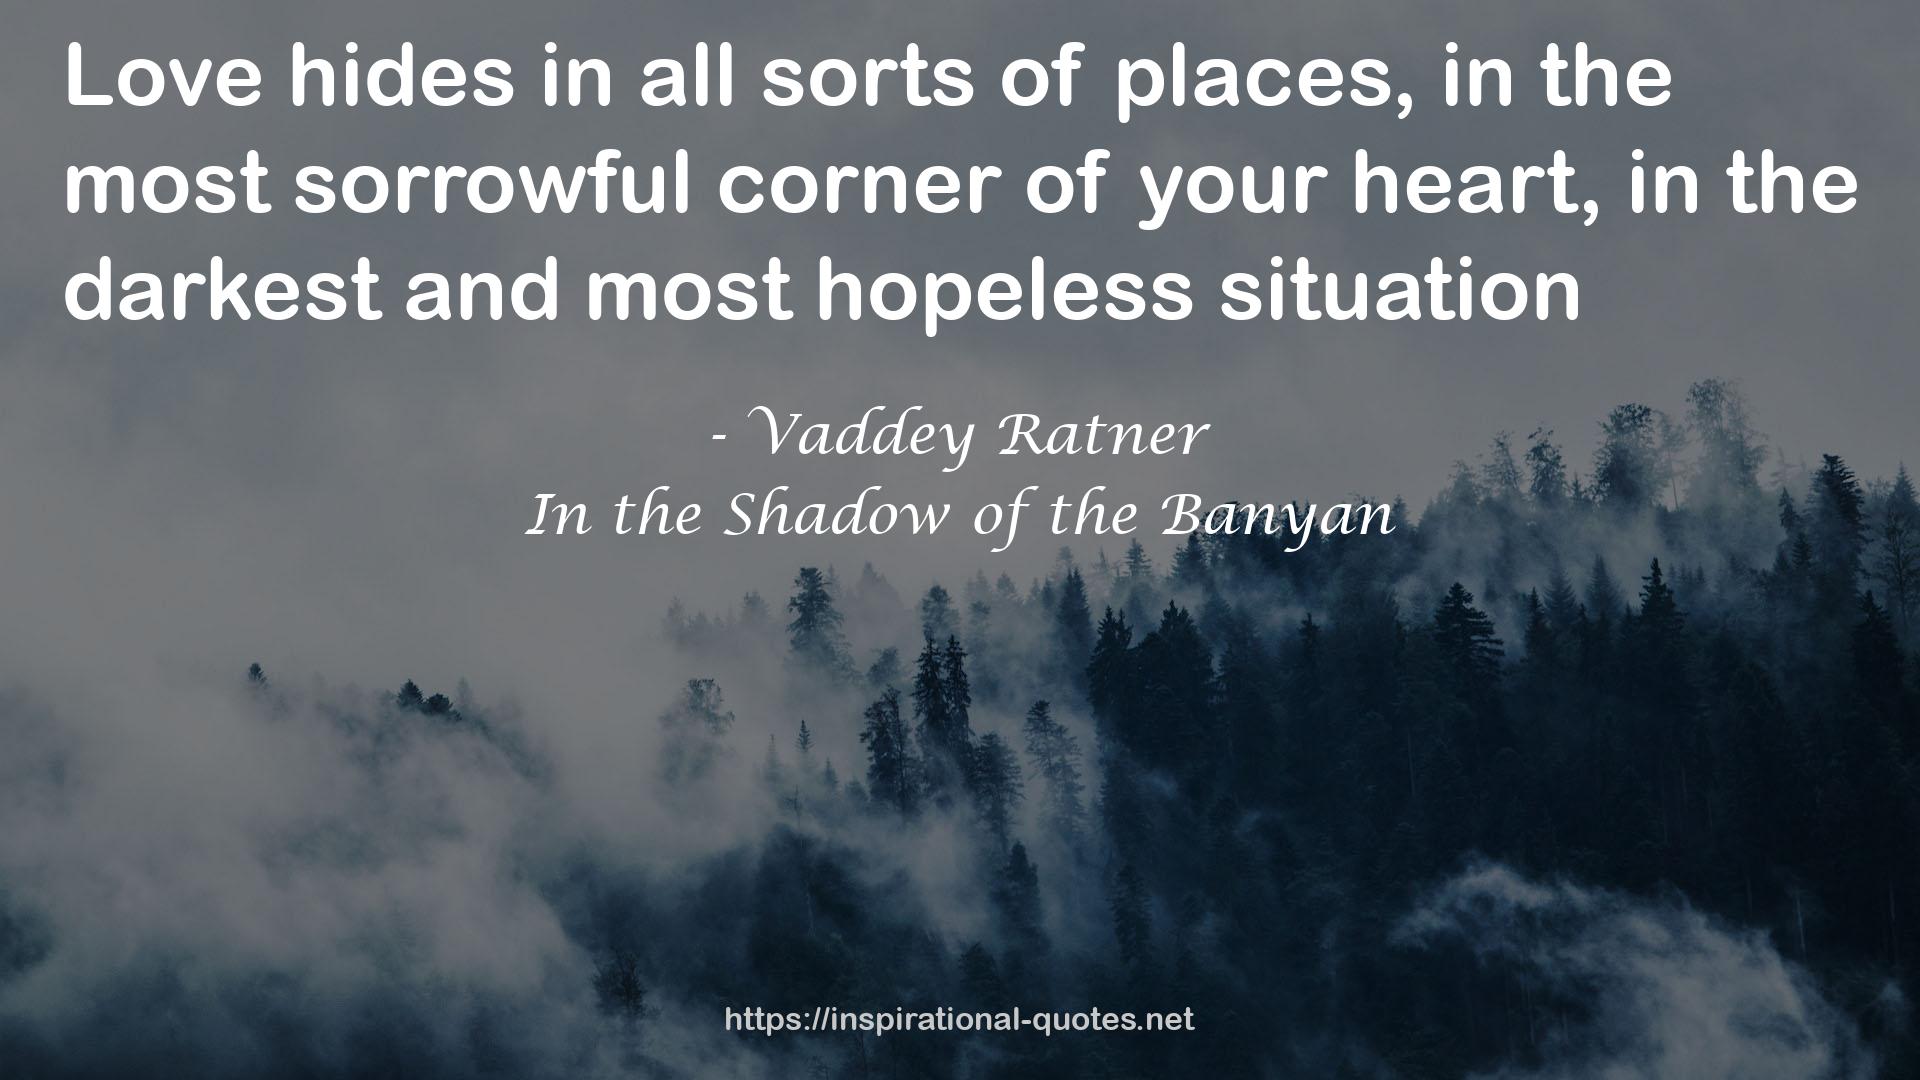 In the Shadow of the Banyan QUOTES